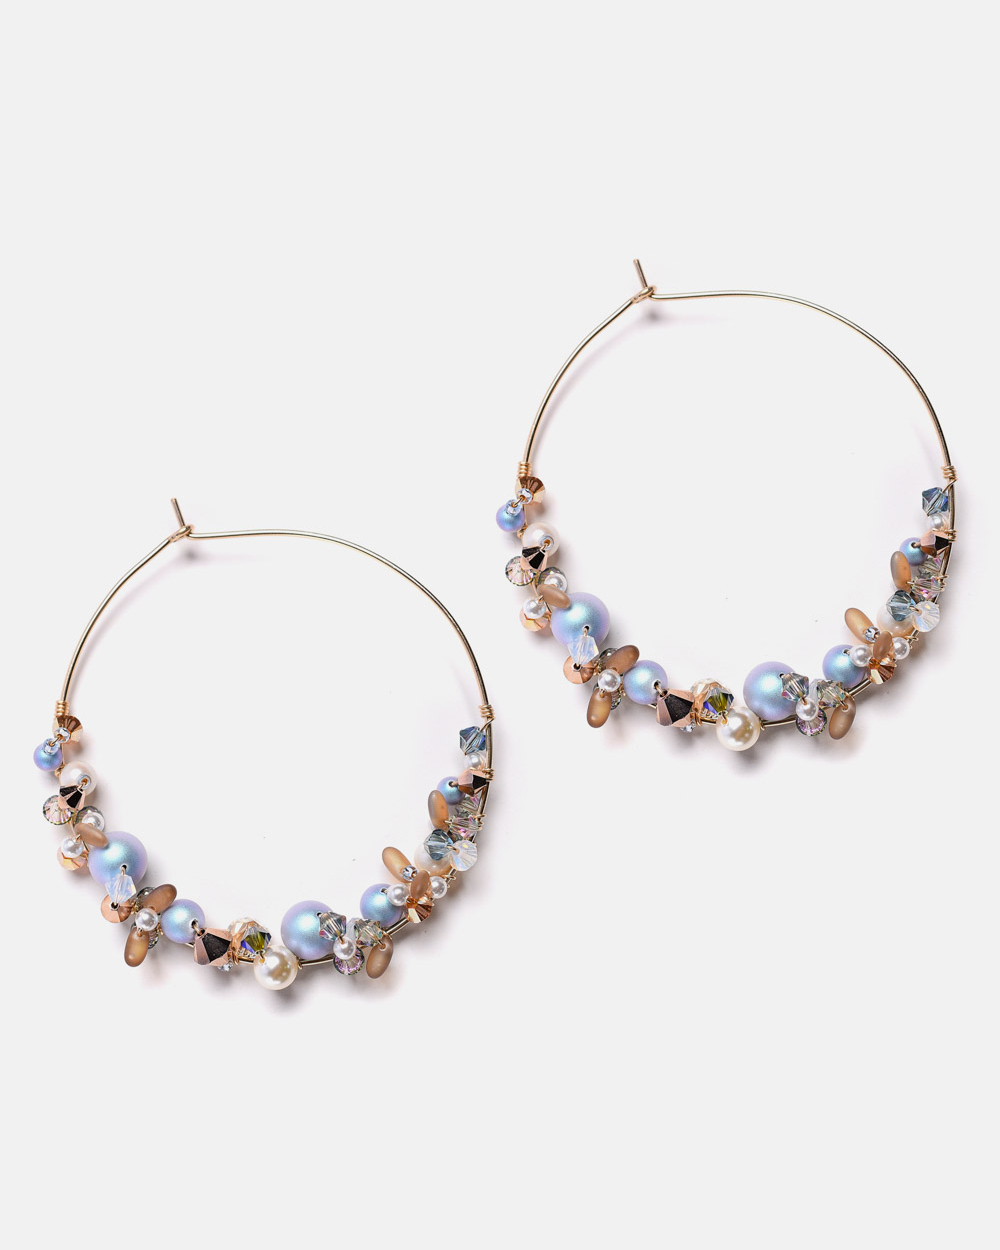 14k gold filled earrings with blue pearls and colorful crystals